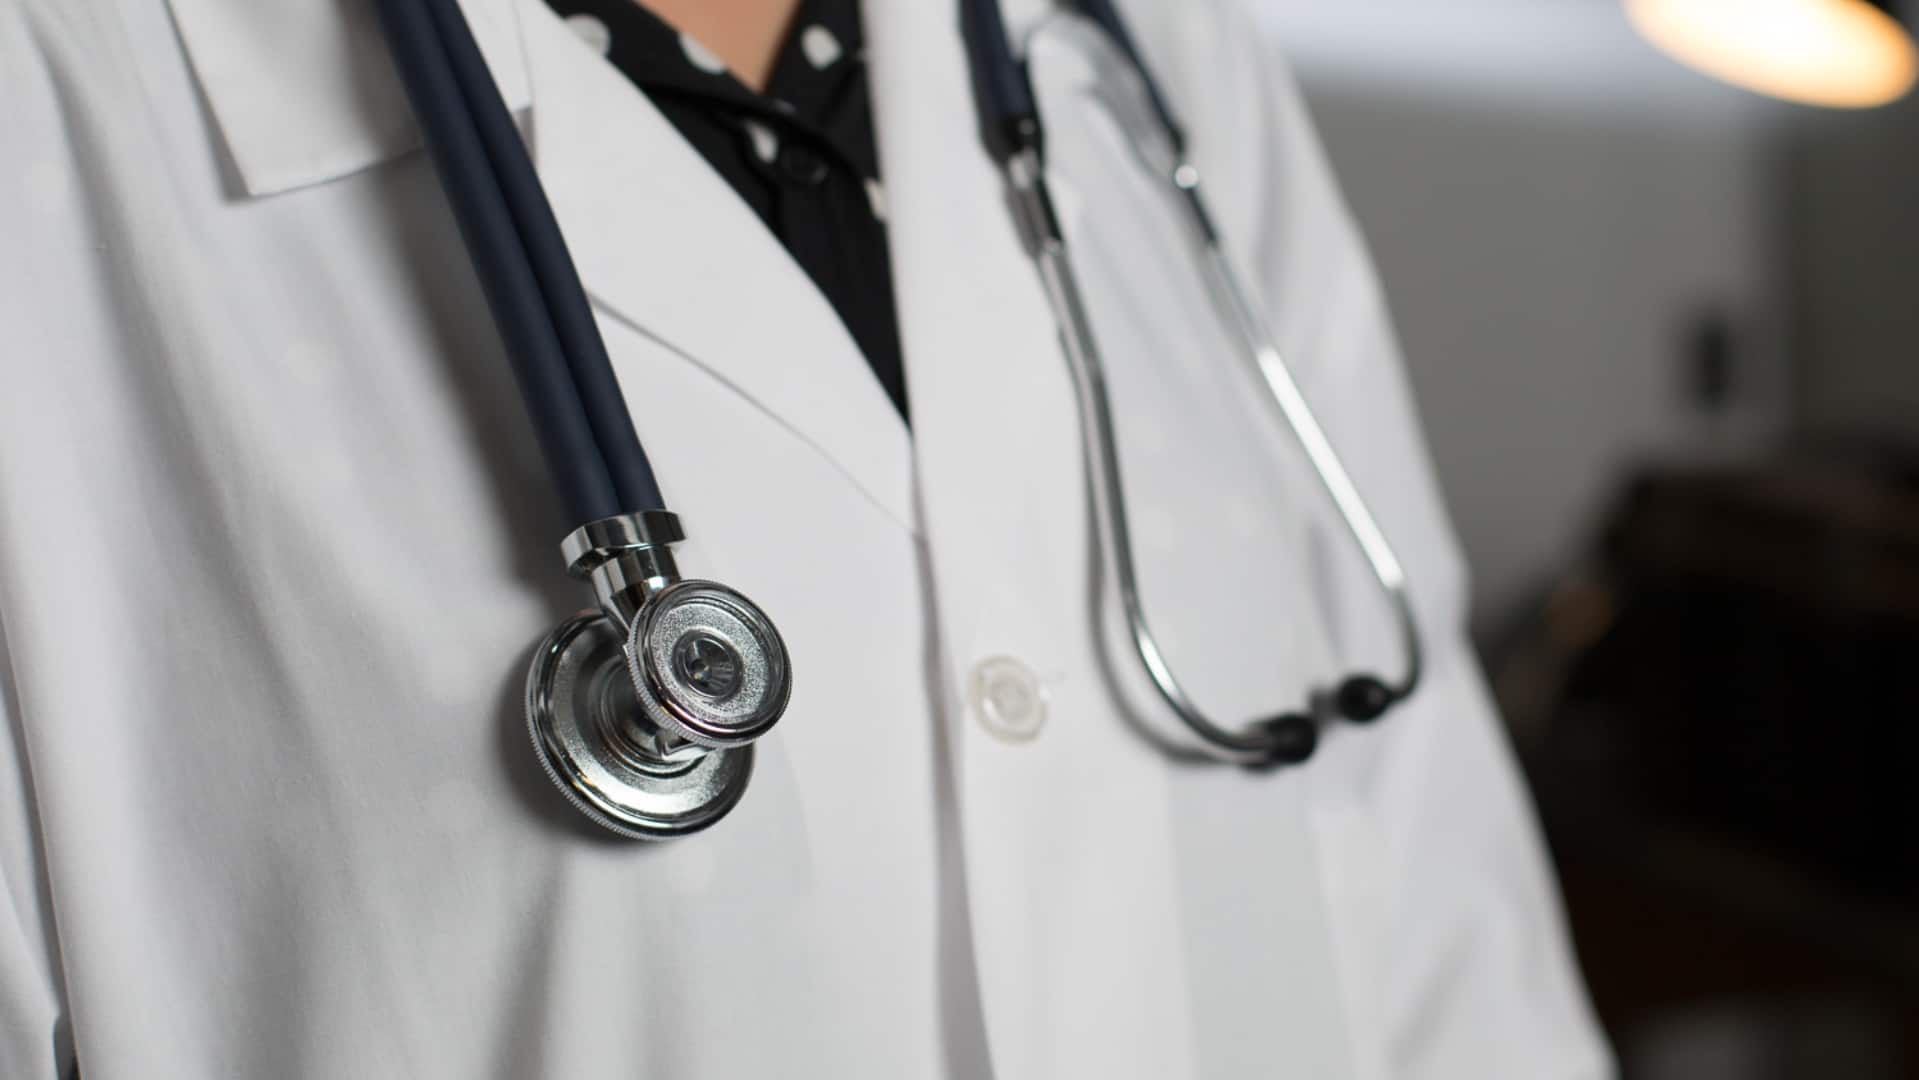 foreign doctors take up more medical residency spots as canadians struggle to get in 1